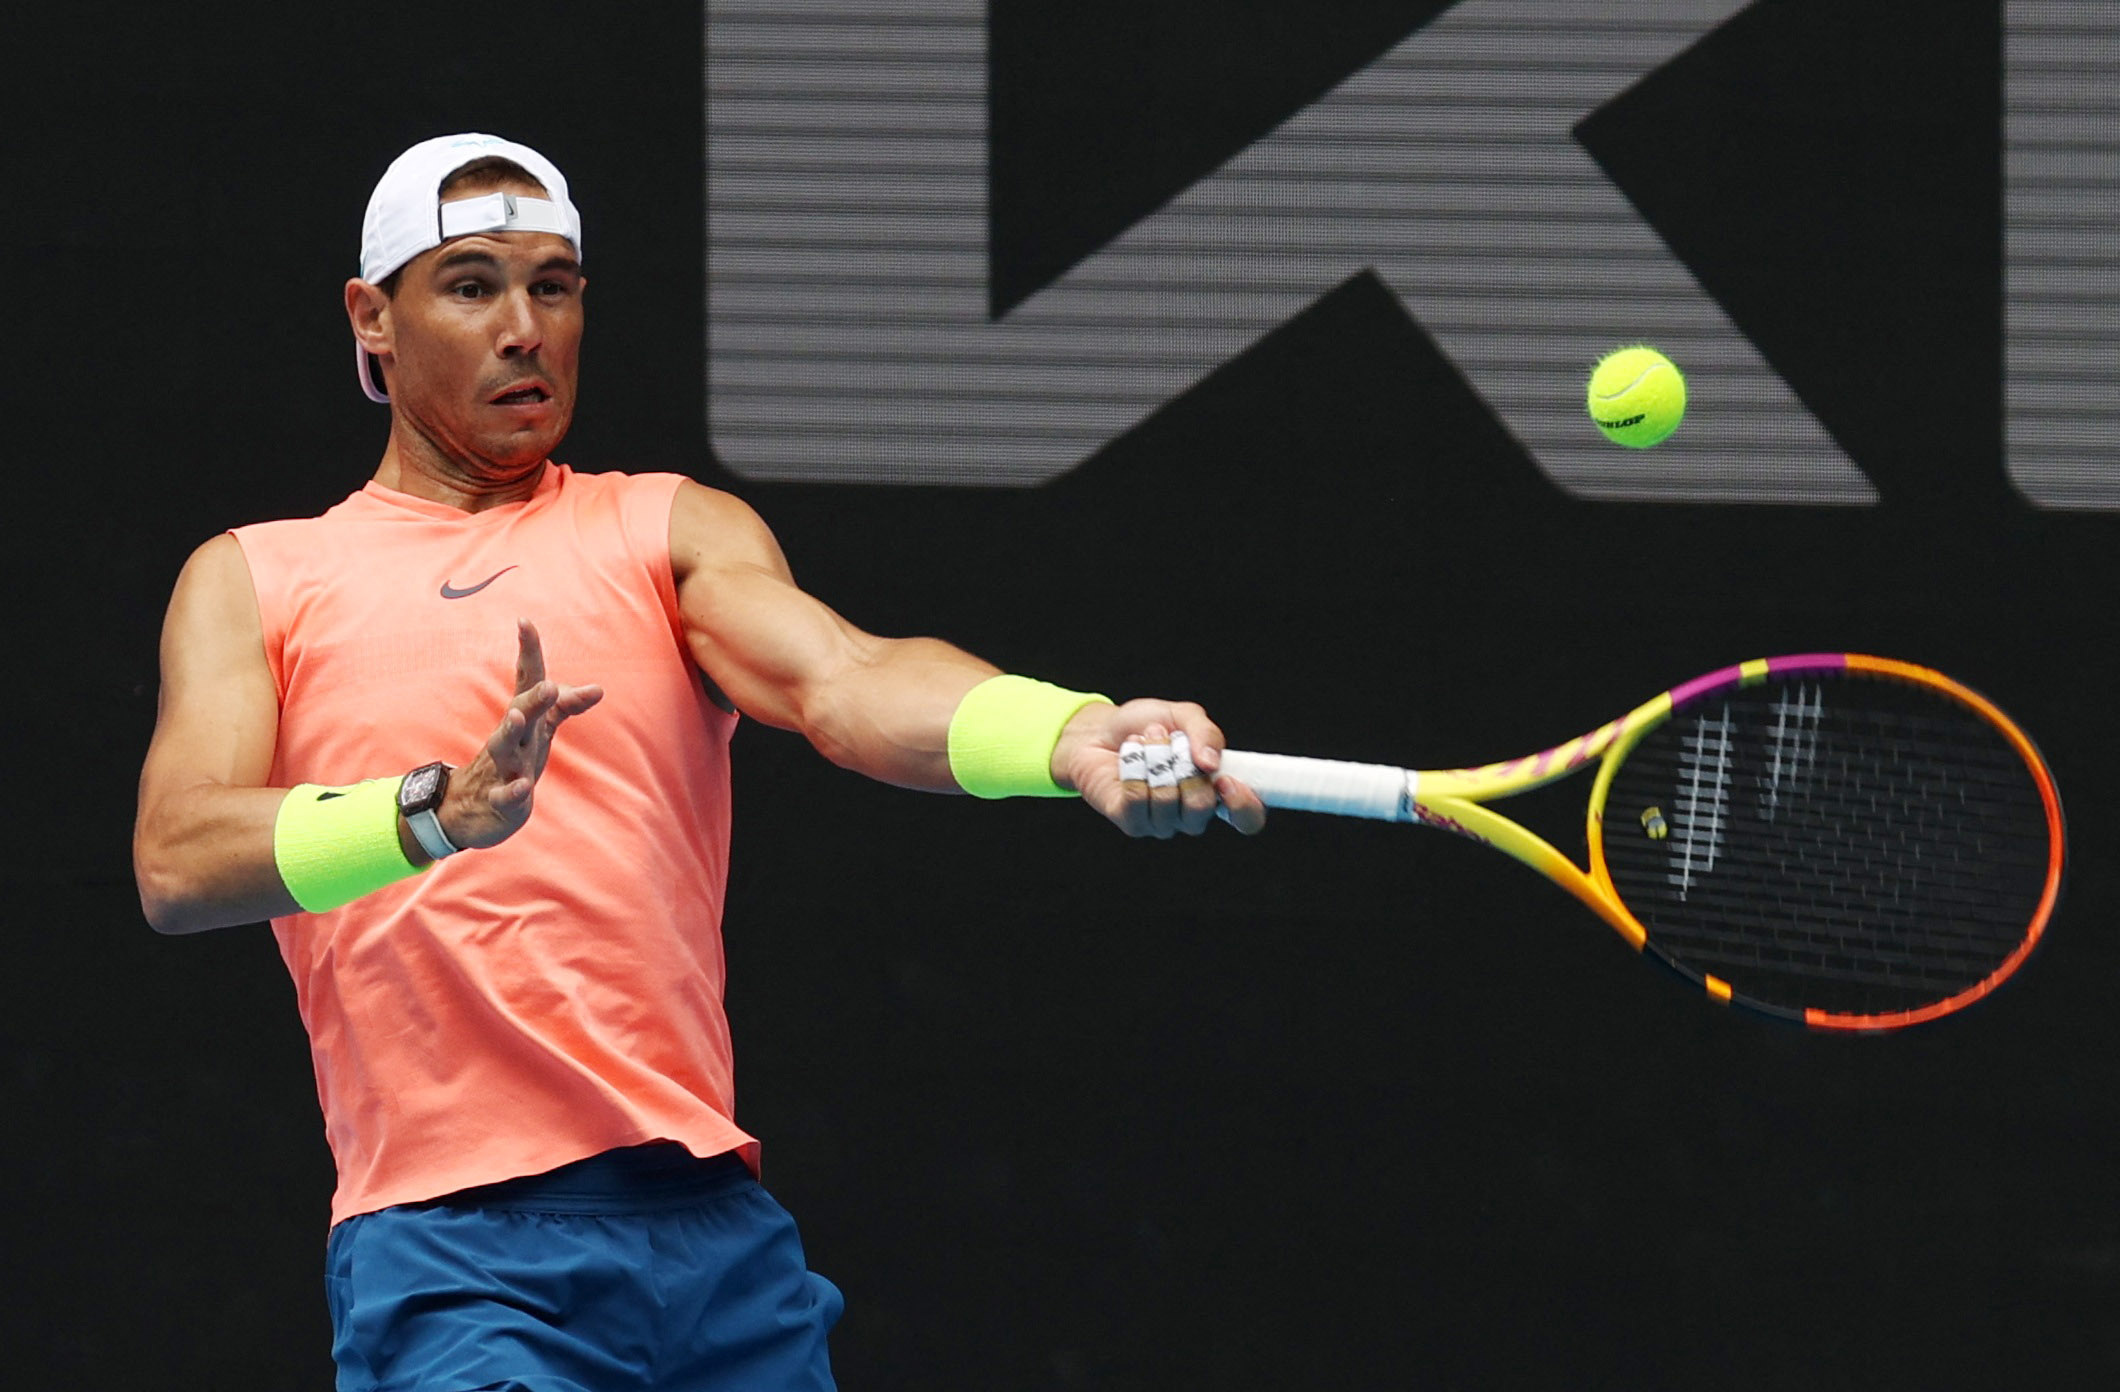 Rafa Nadal will kick off his Australian Open title defence on Monday with a first round test against rising